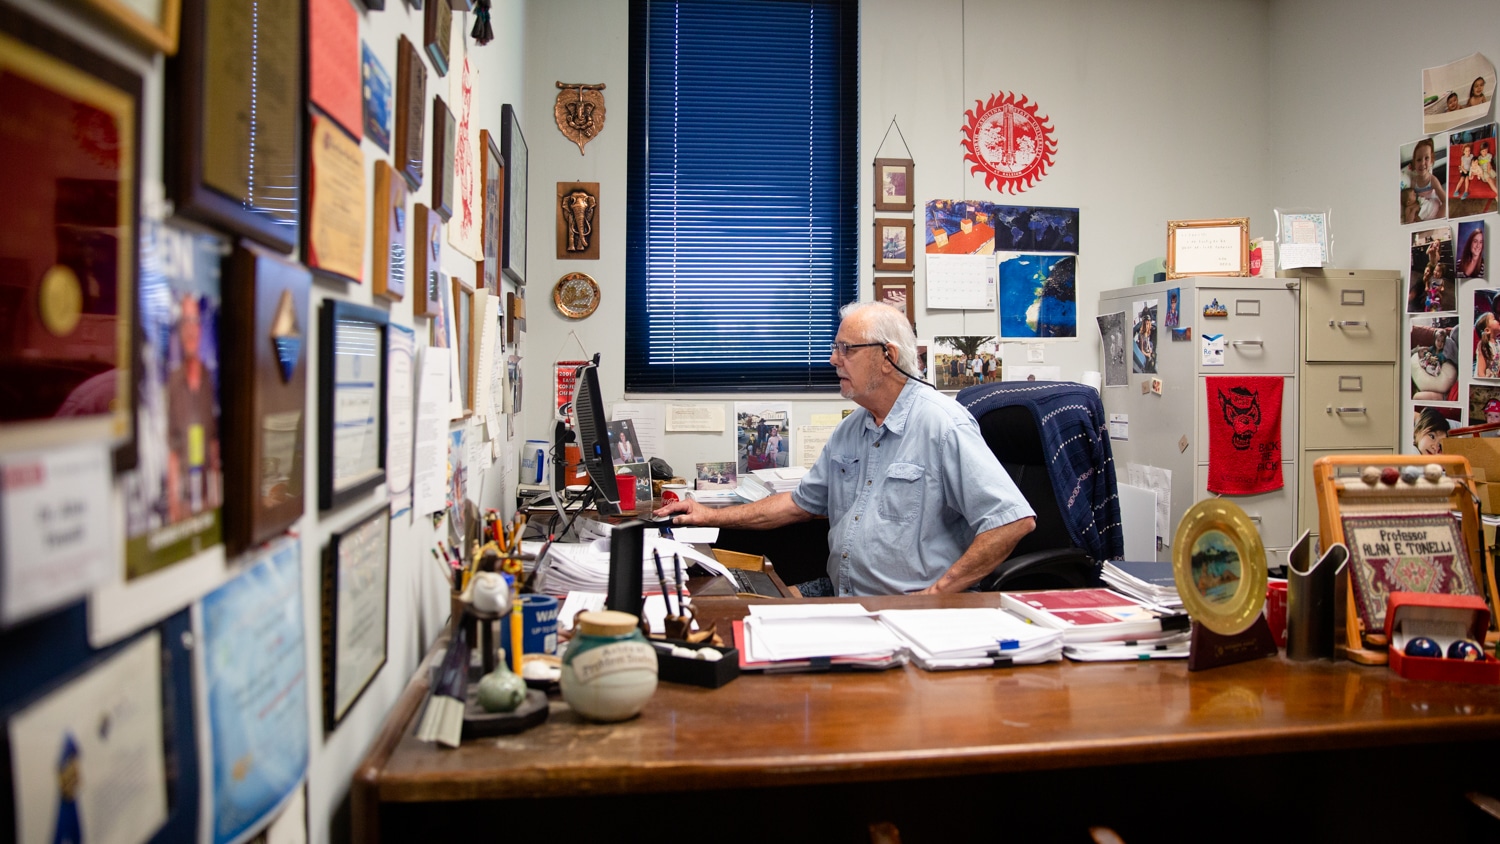 Al Tonelli sets in front of his desk in his office and works at his computer. His office walls are covered in awards, diplomas and photos.